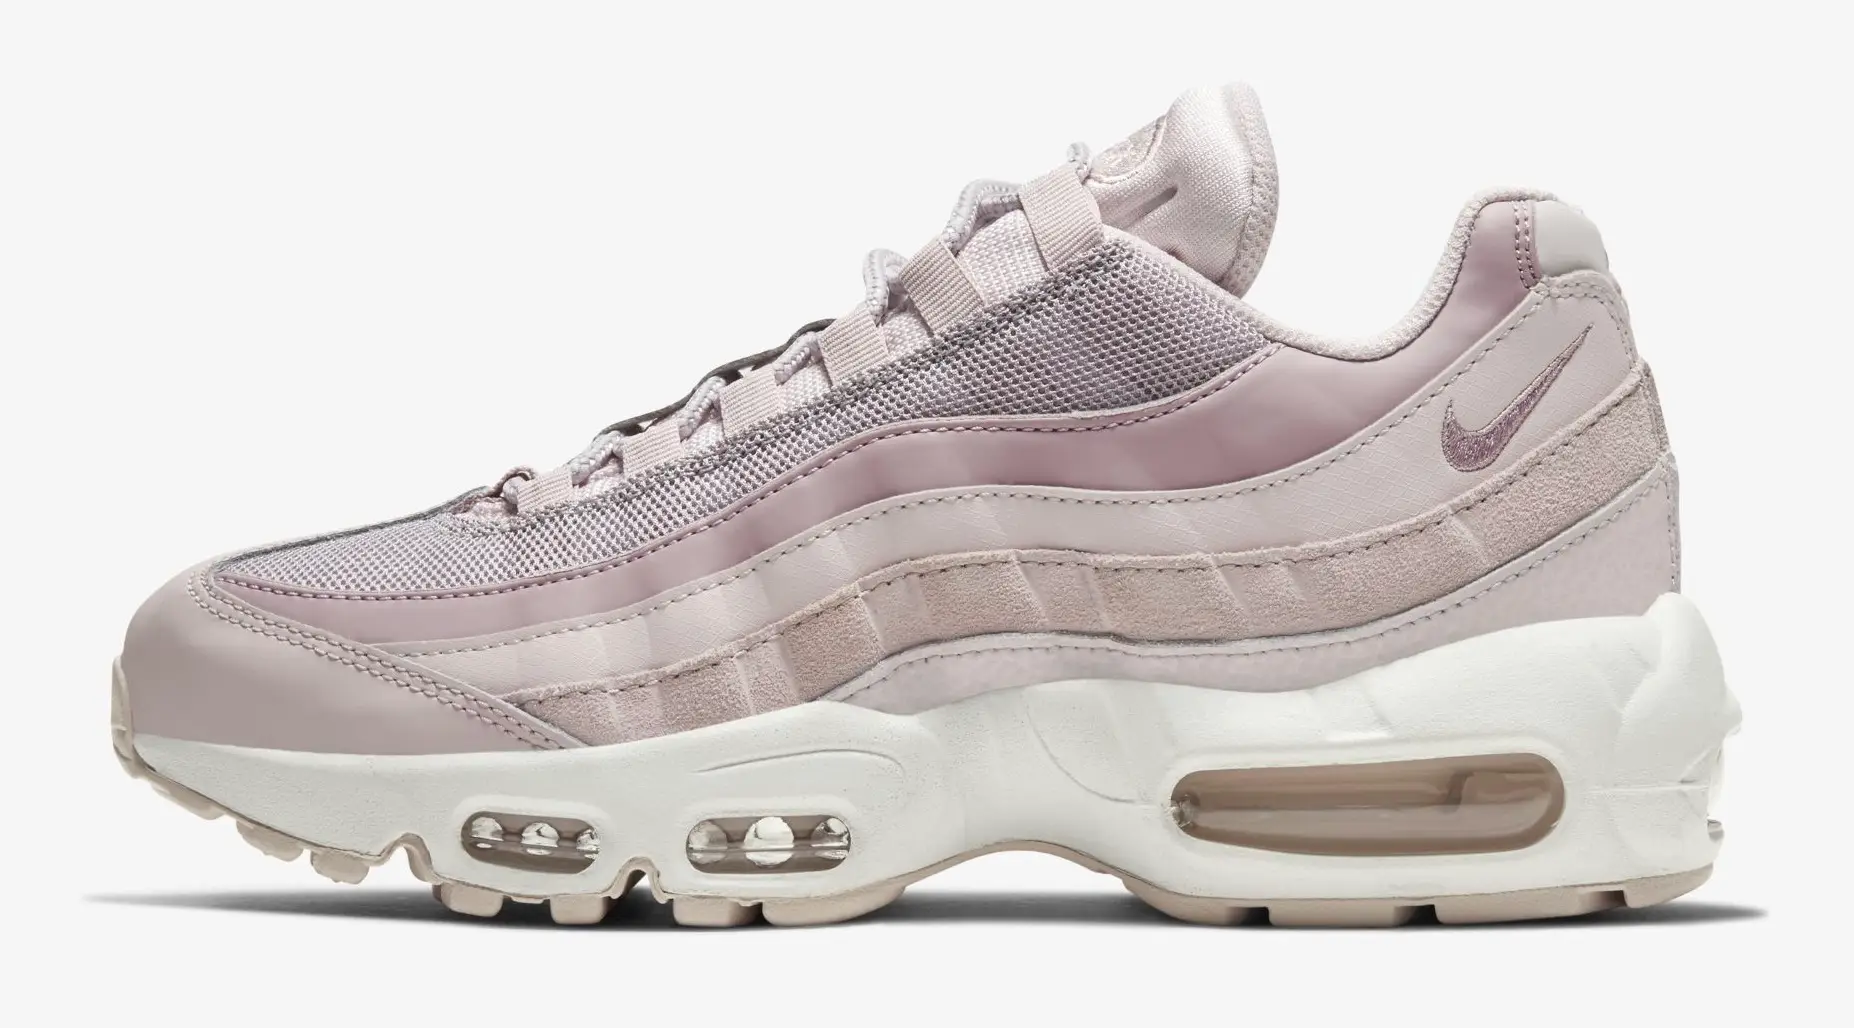 This Nike Air Max 95 Is Unmissable In Barely Rose & Plum Chalk | The ...